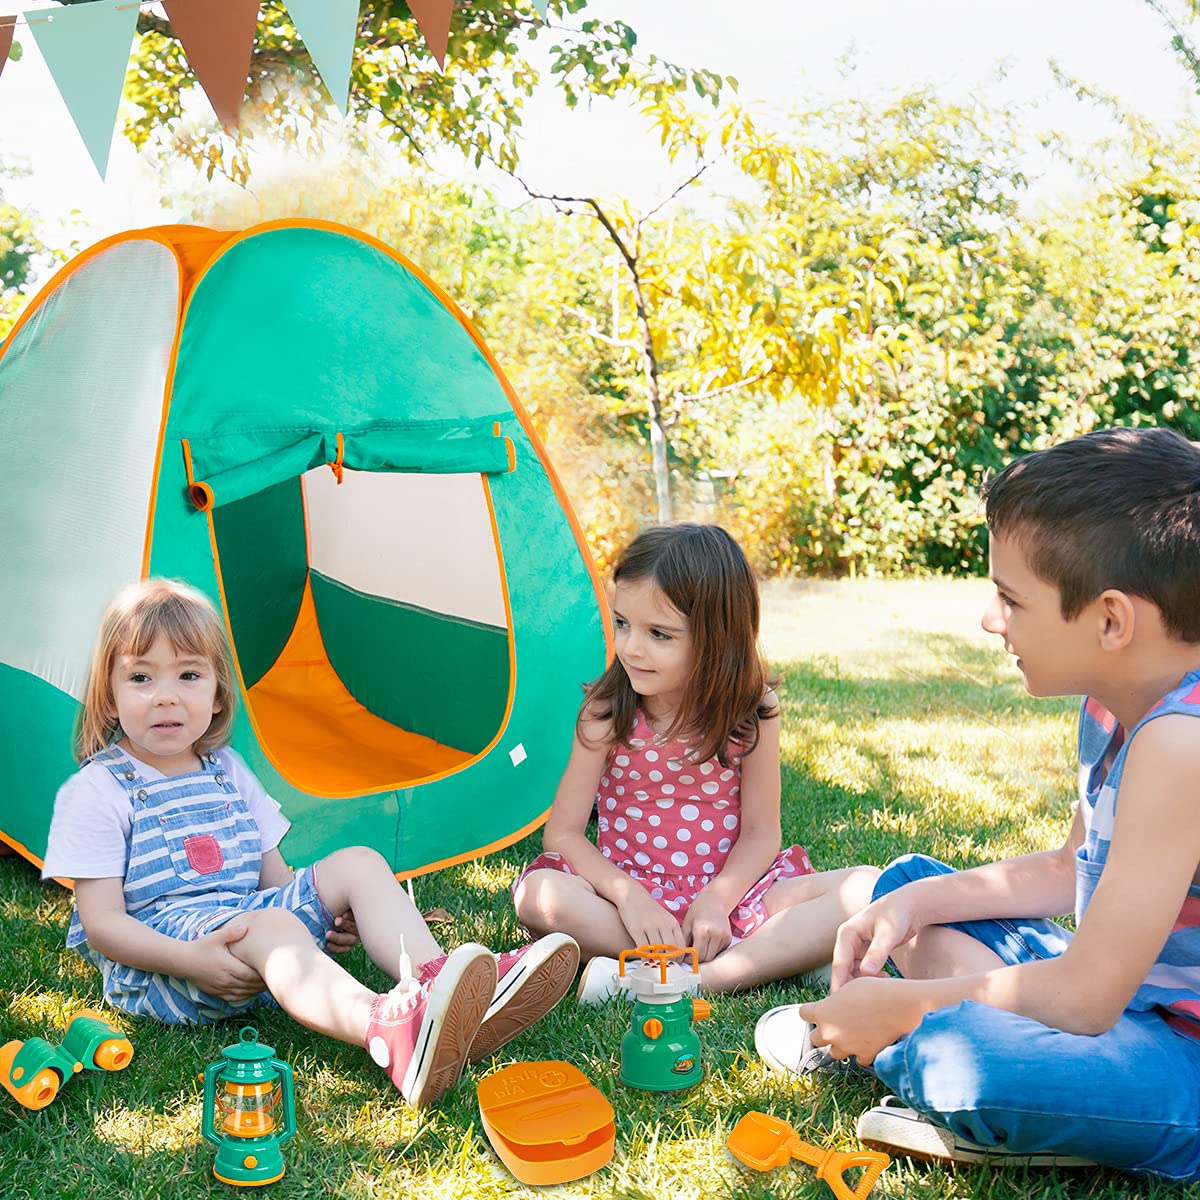 Meland Kids Camping Set with Tent 24pcs - Camping Gear Tool Pretend Play Set for Toddlers Kids Boys Girls Outdoor Toy Birthday Gift